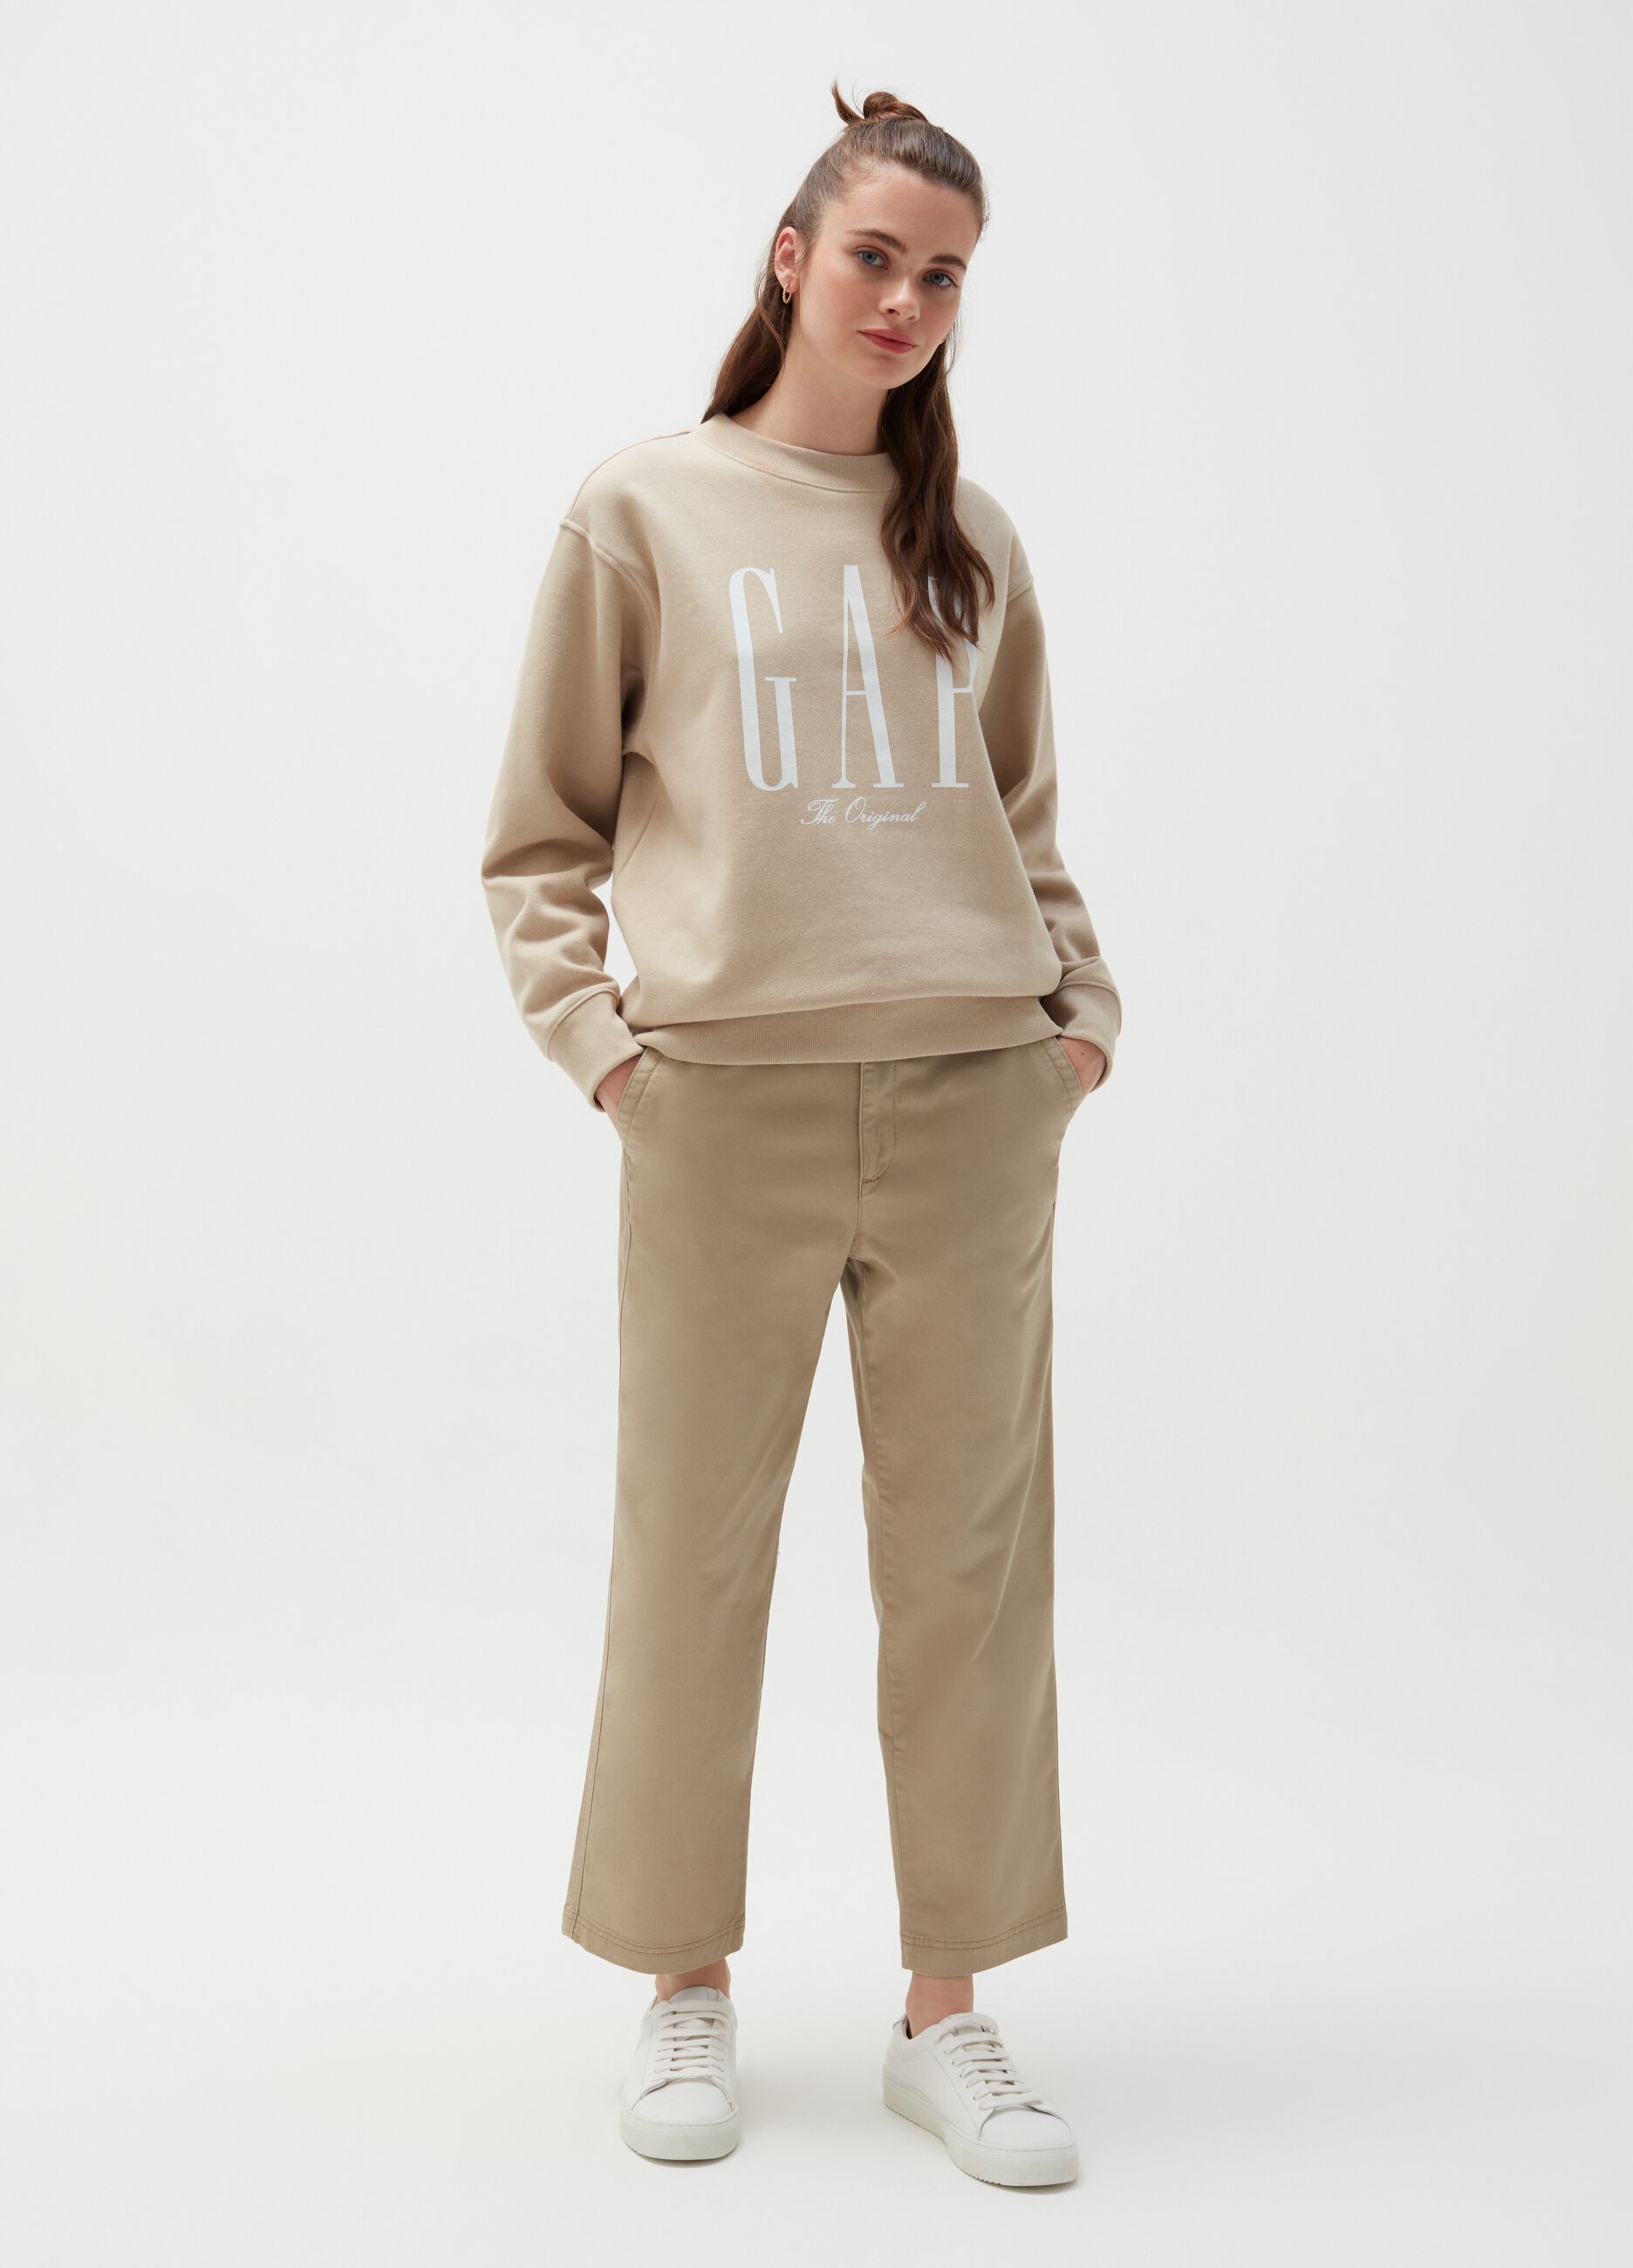 Girlfriend-fit cotton trousers